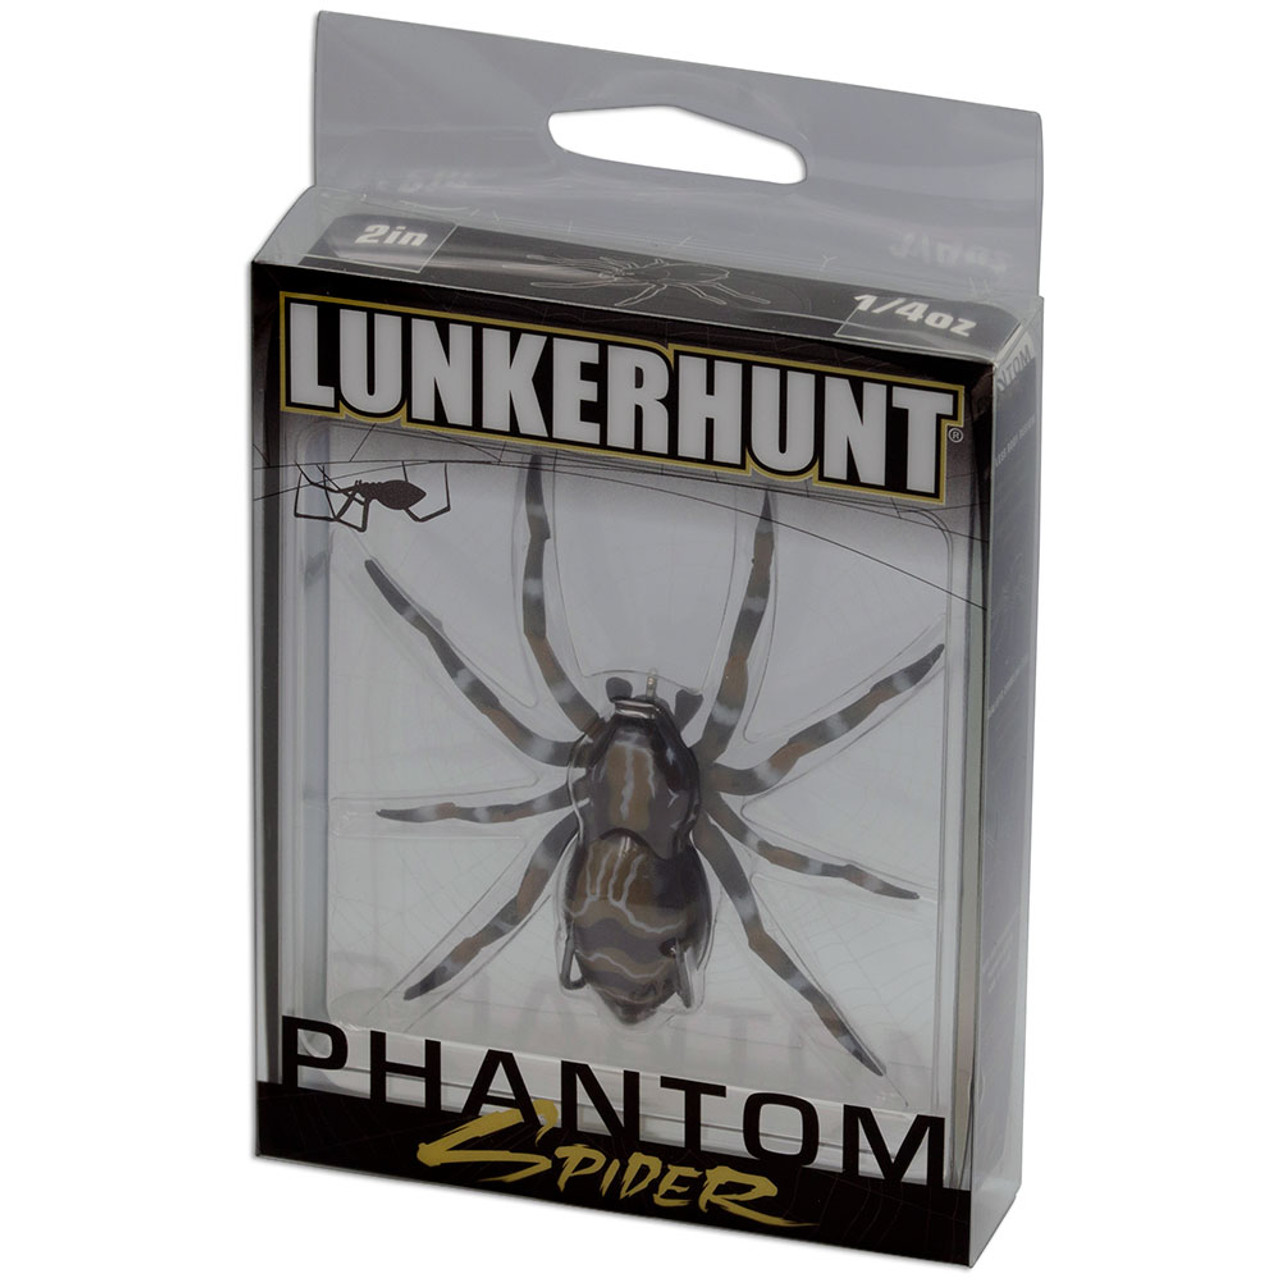  LUNKERHUNT Phantom Spider Lure For Bass Fishing (2.5 Inch) Topwater  Spider Fishing Lure